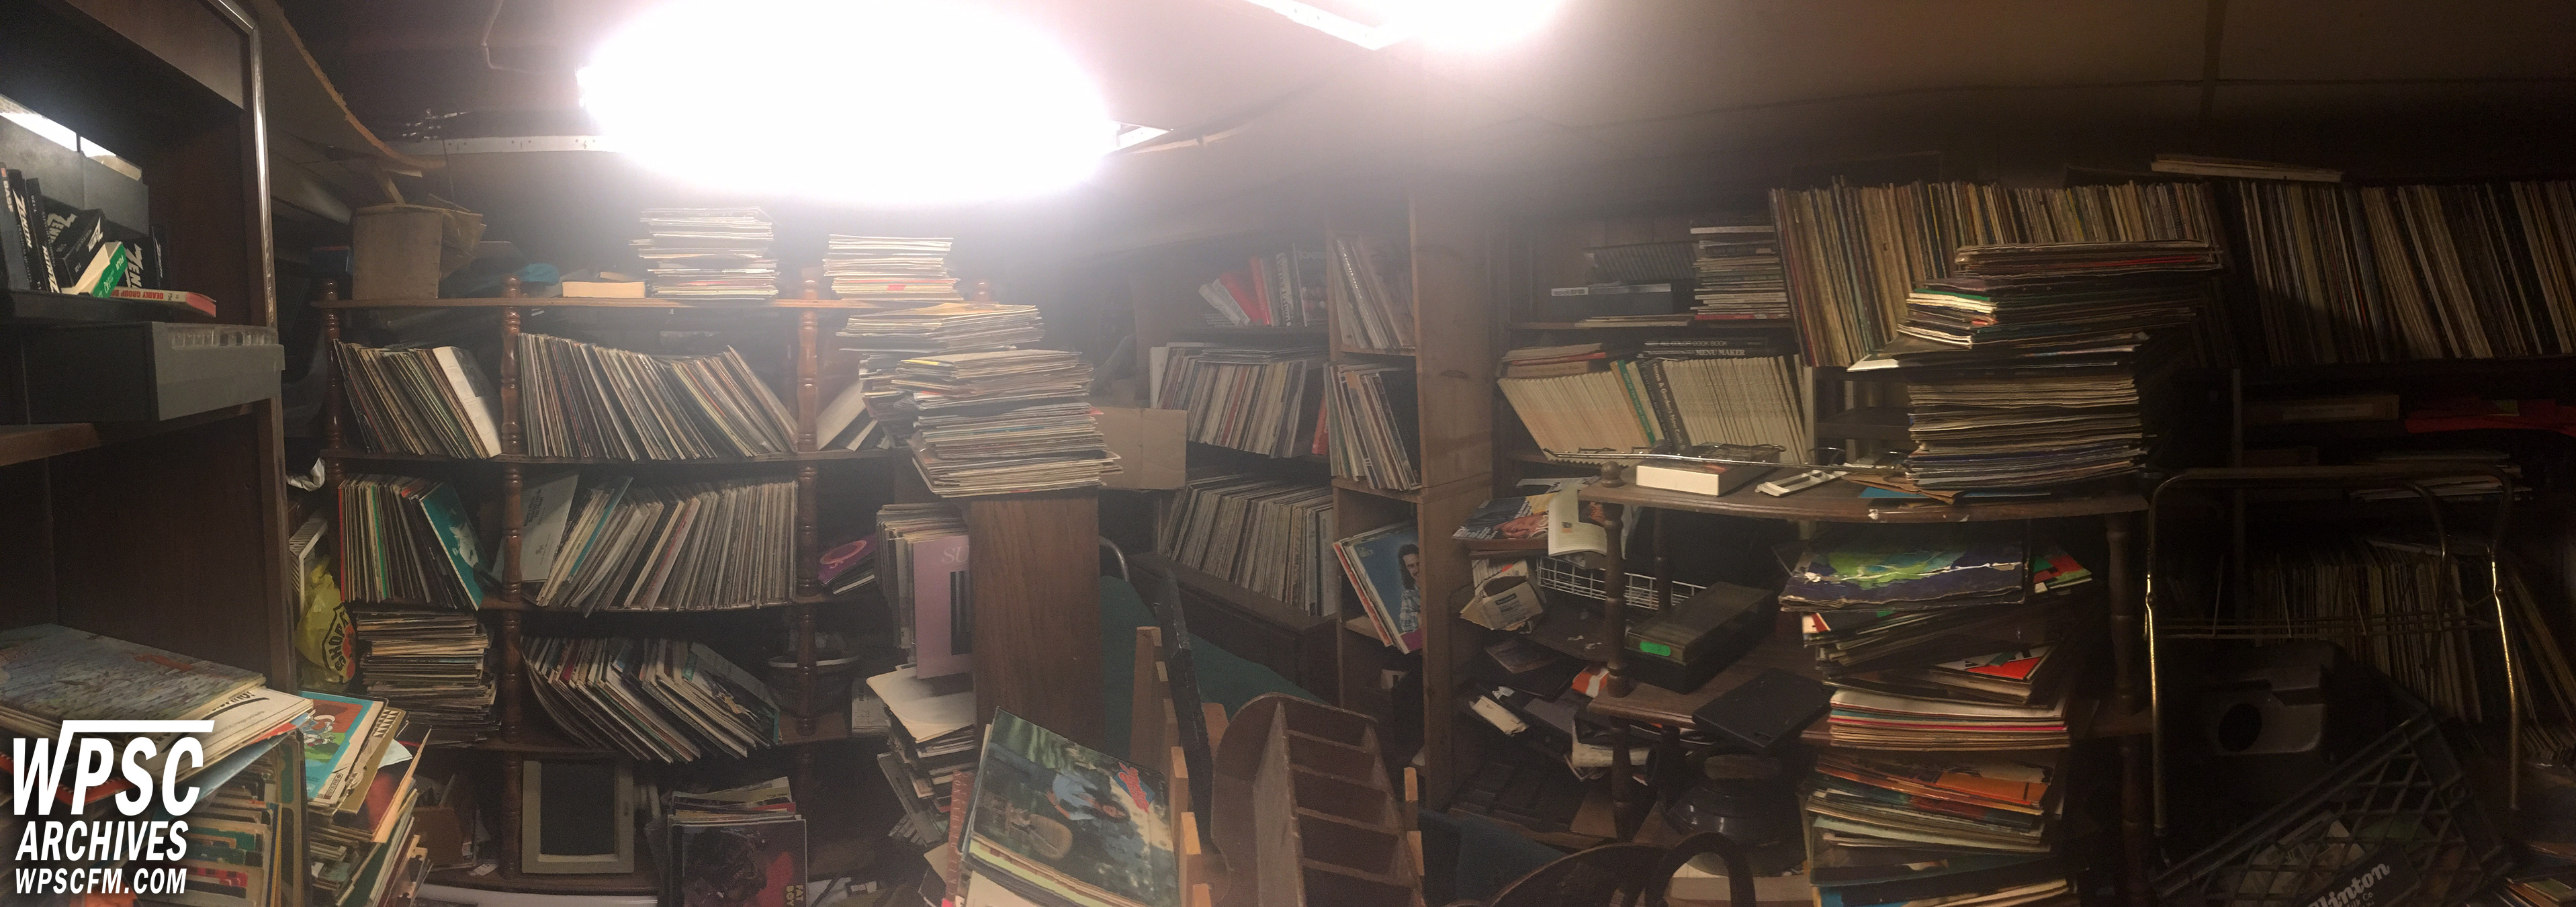 Panorama Of Basement With Record Collection